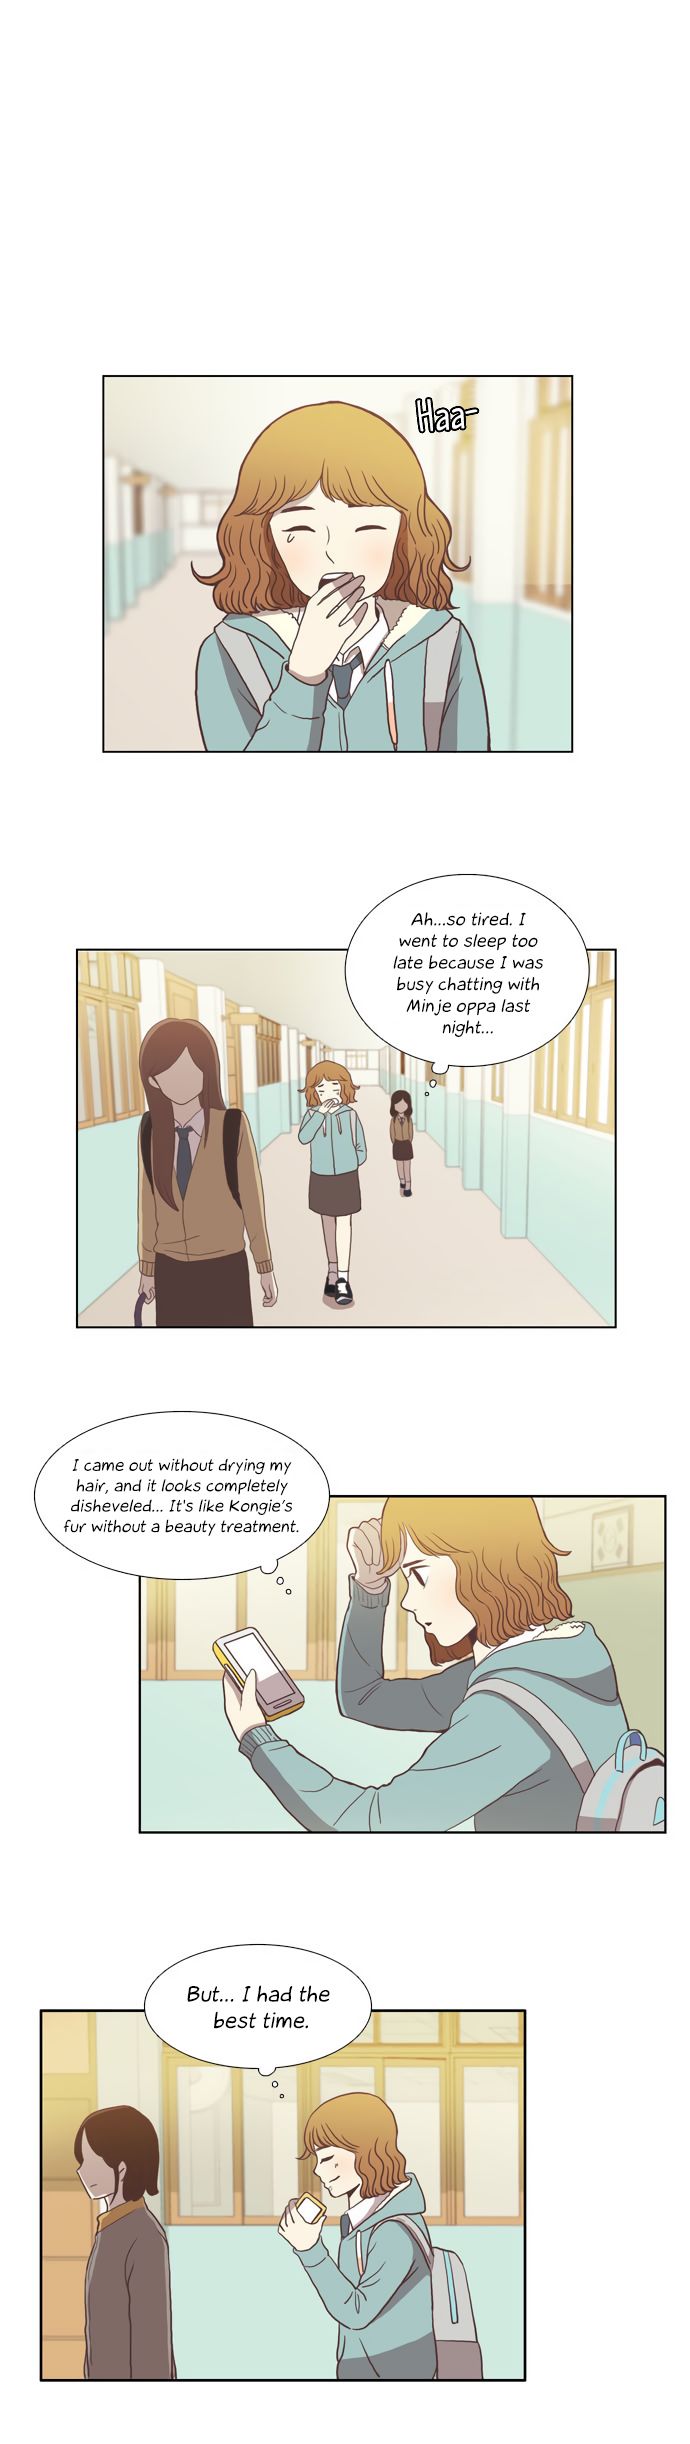 Girl's World - Page 1